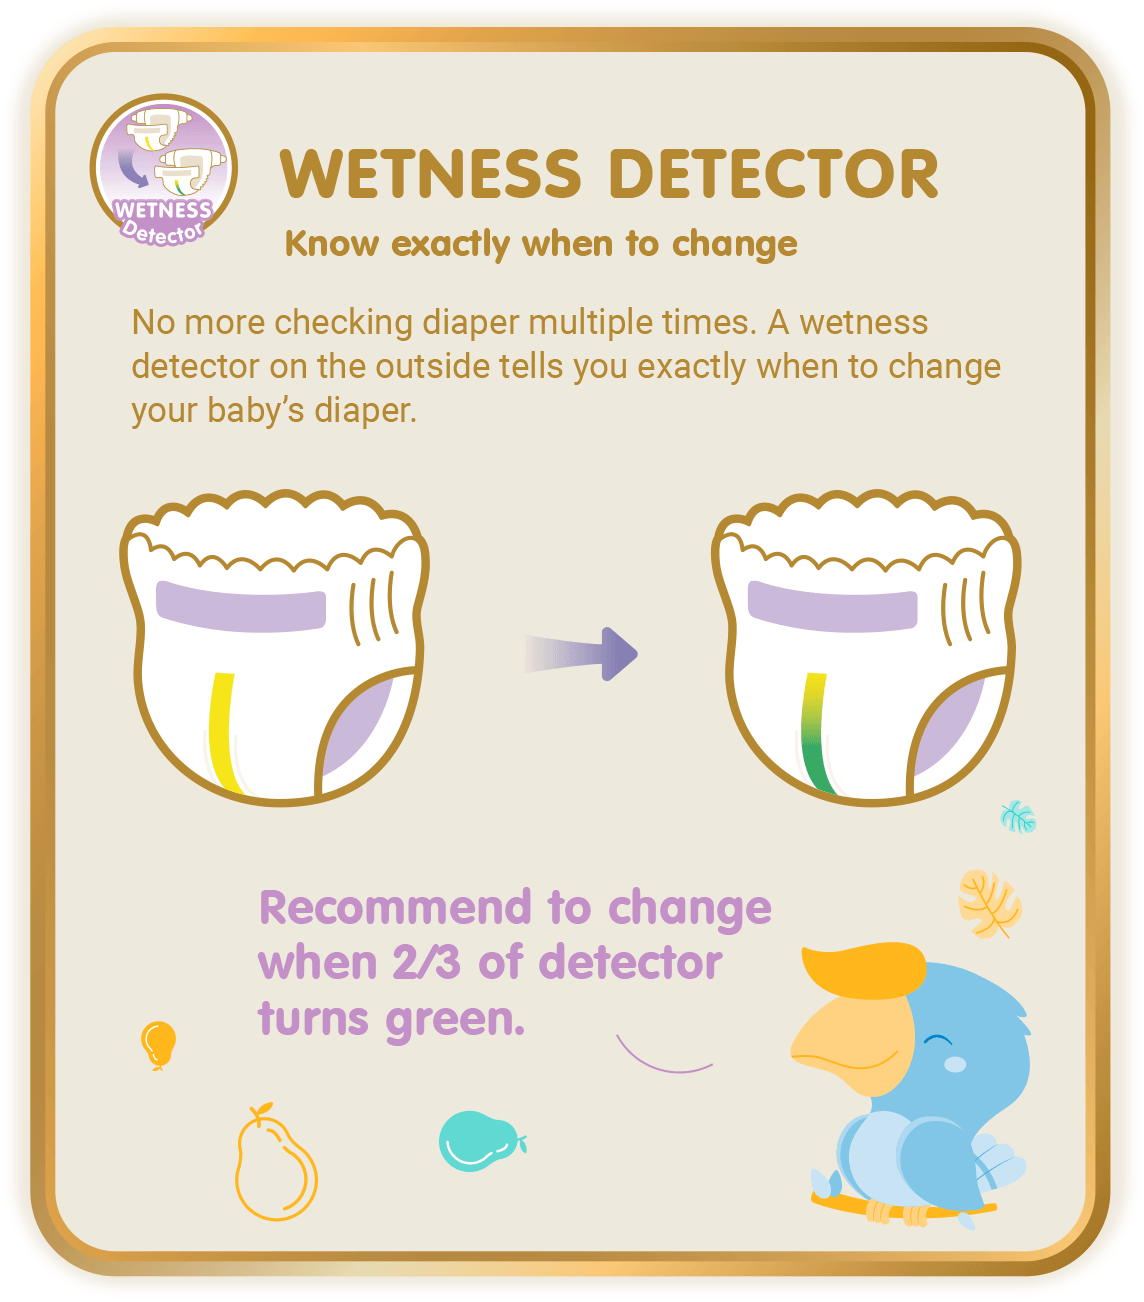 Wetness Detector, Know exactly when to change: No more checking diaper multiple times. A wetness detector on the outside tells you exactly when to change your baby’s diaper.